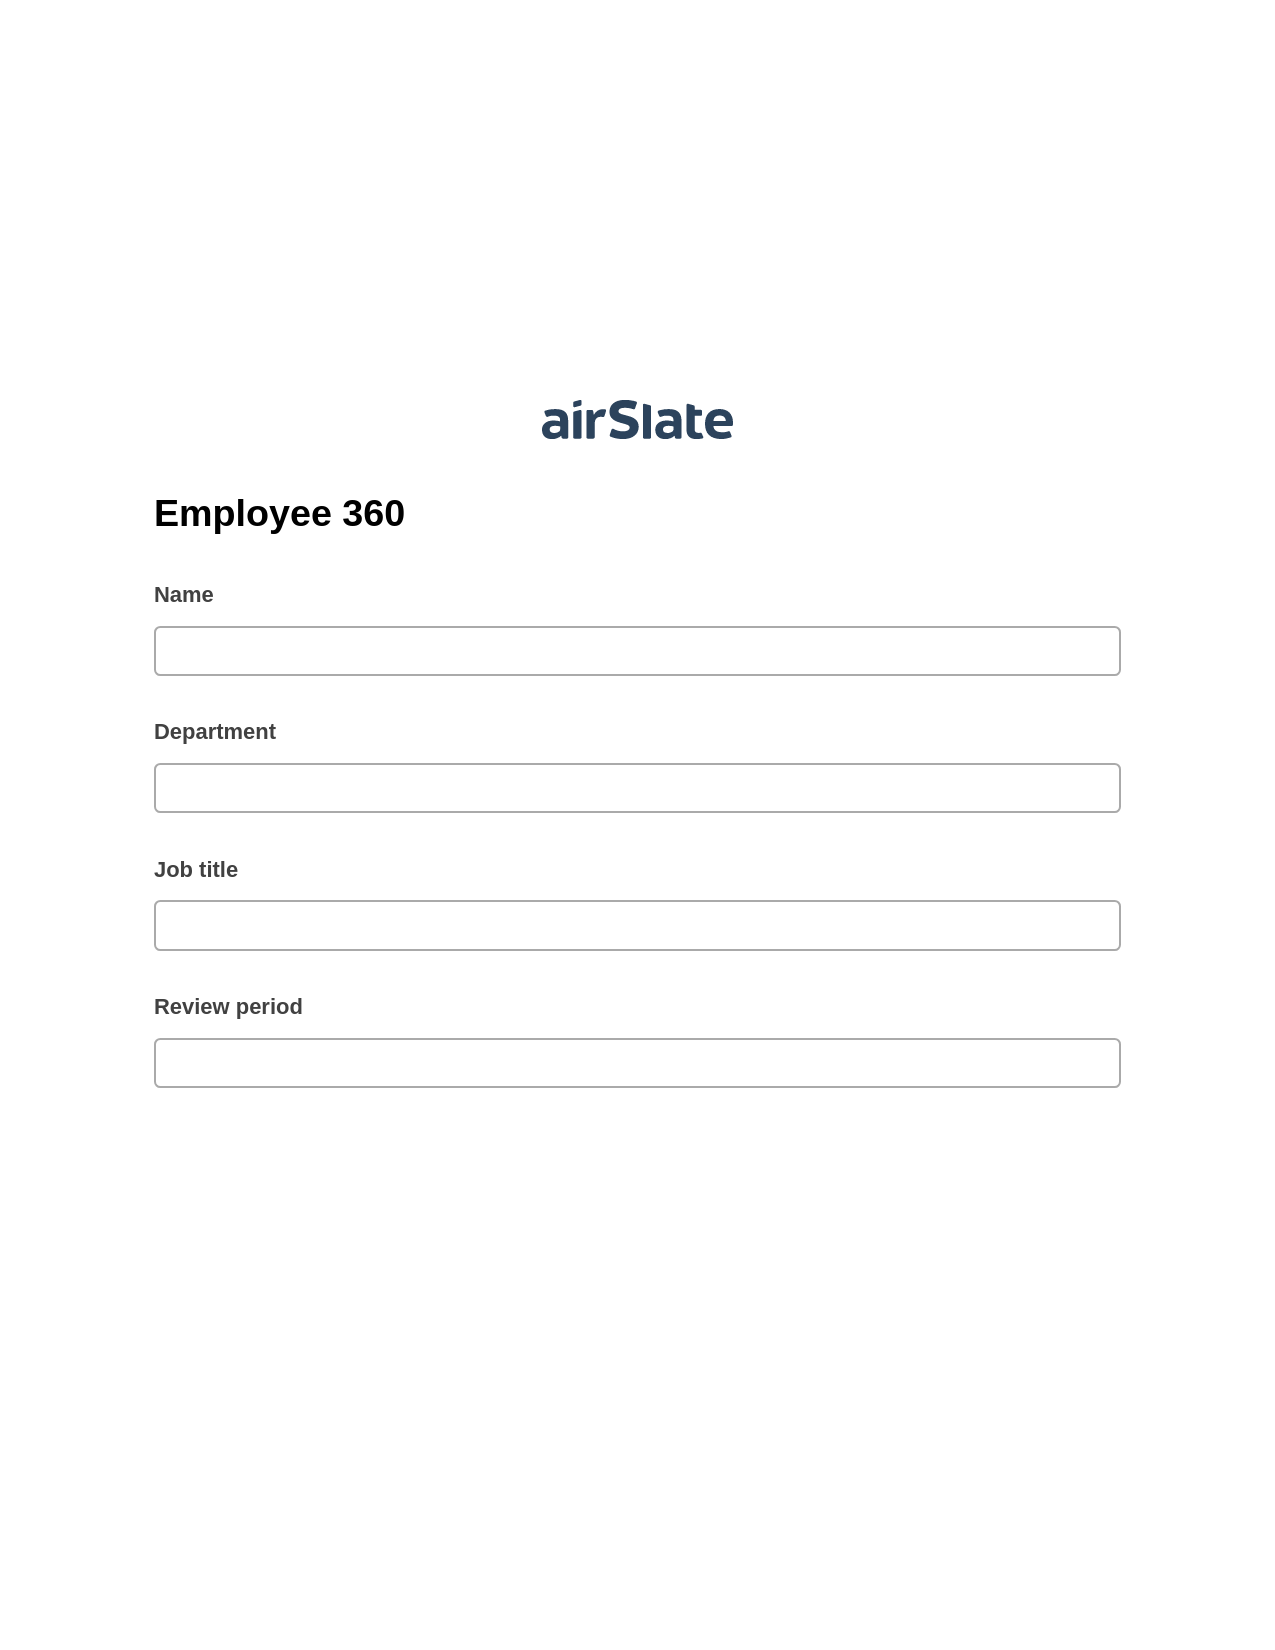 Employee 360 Pre-fill from MySQL Bot, Update MS Dynamics 365 Record Bot, Export to Excel 365 Bot